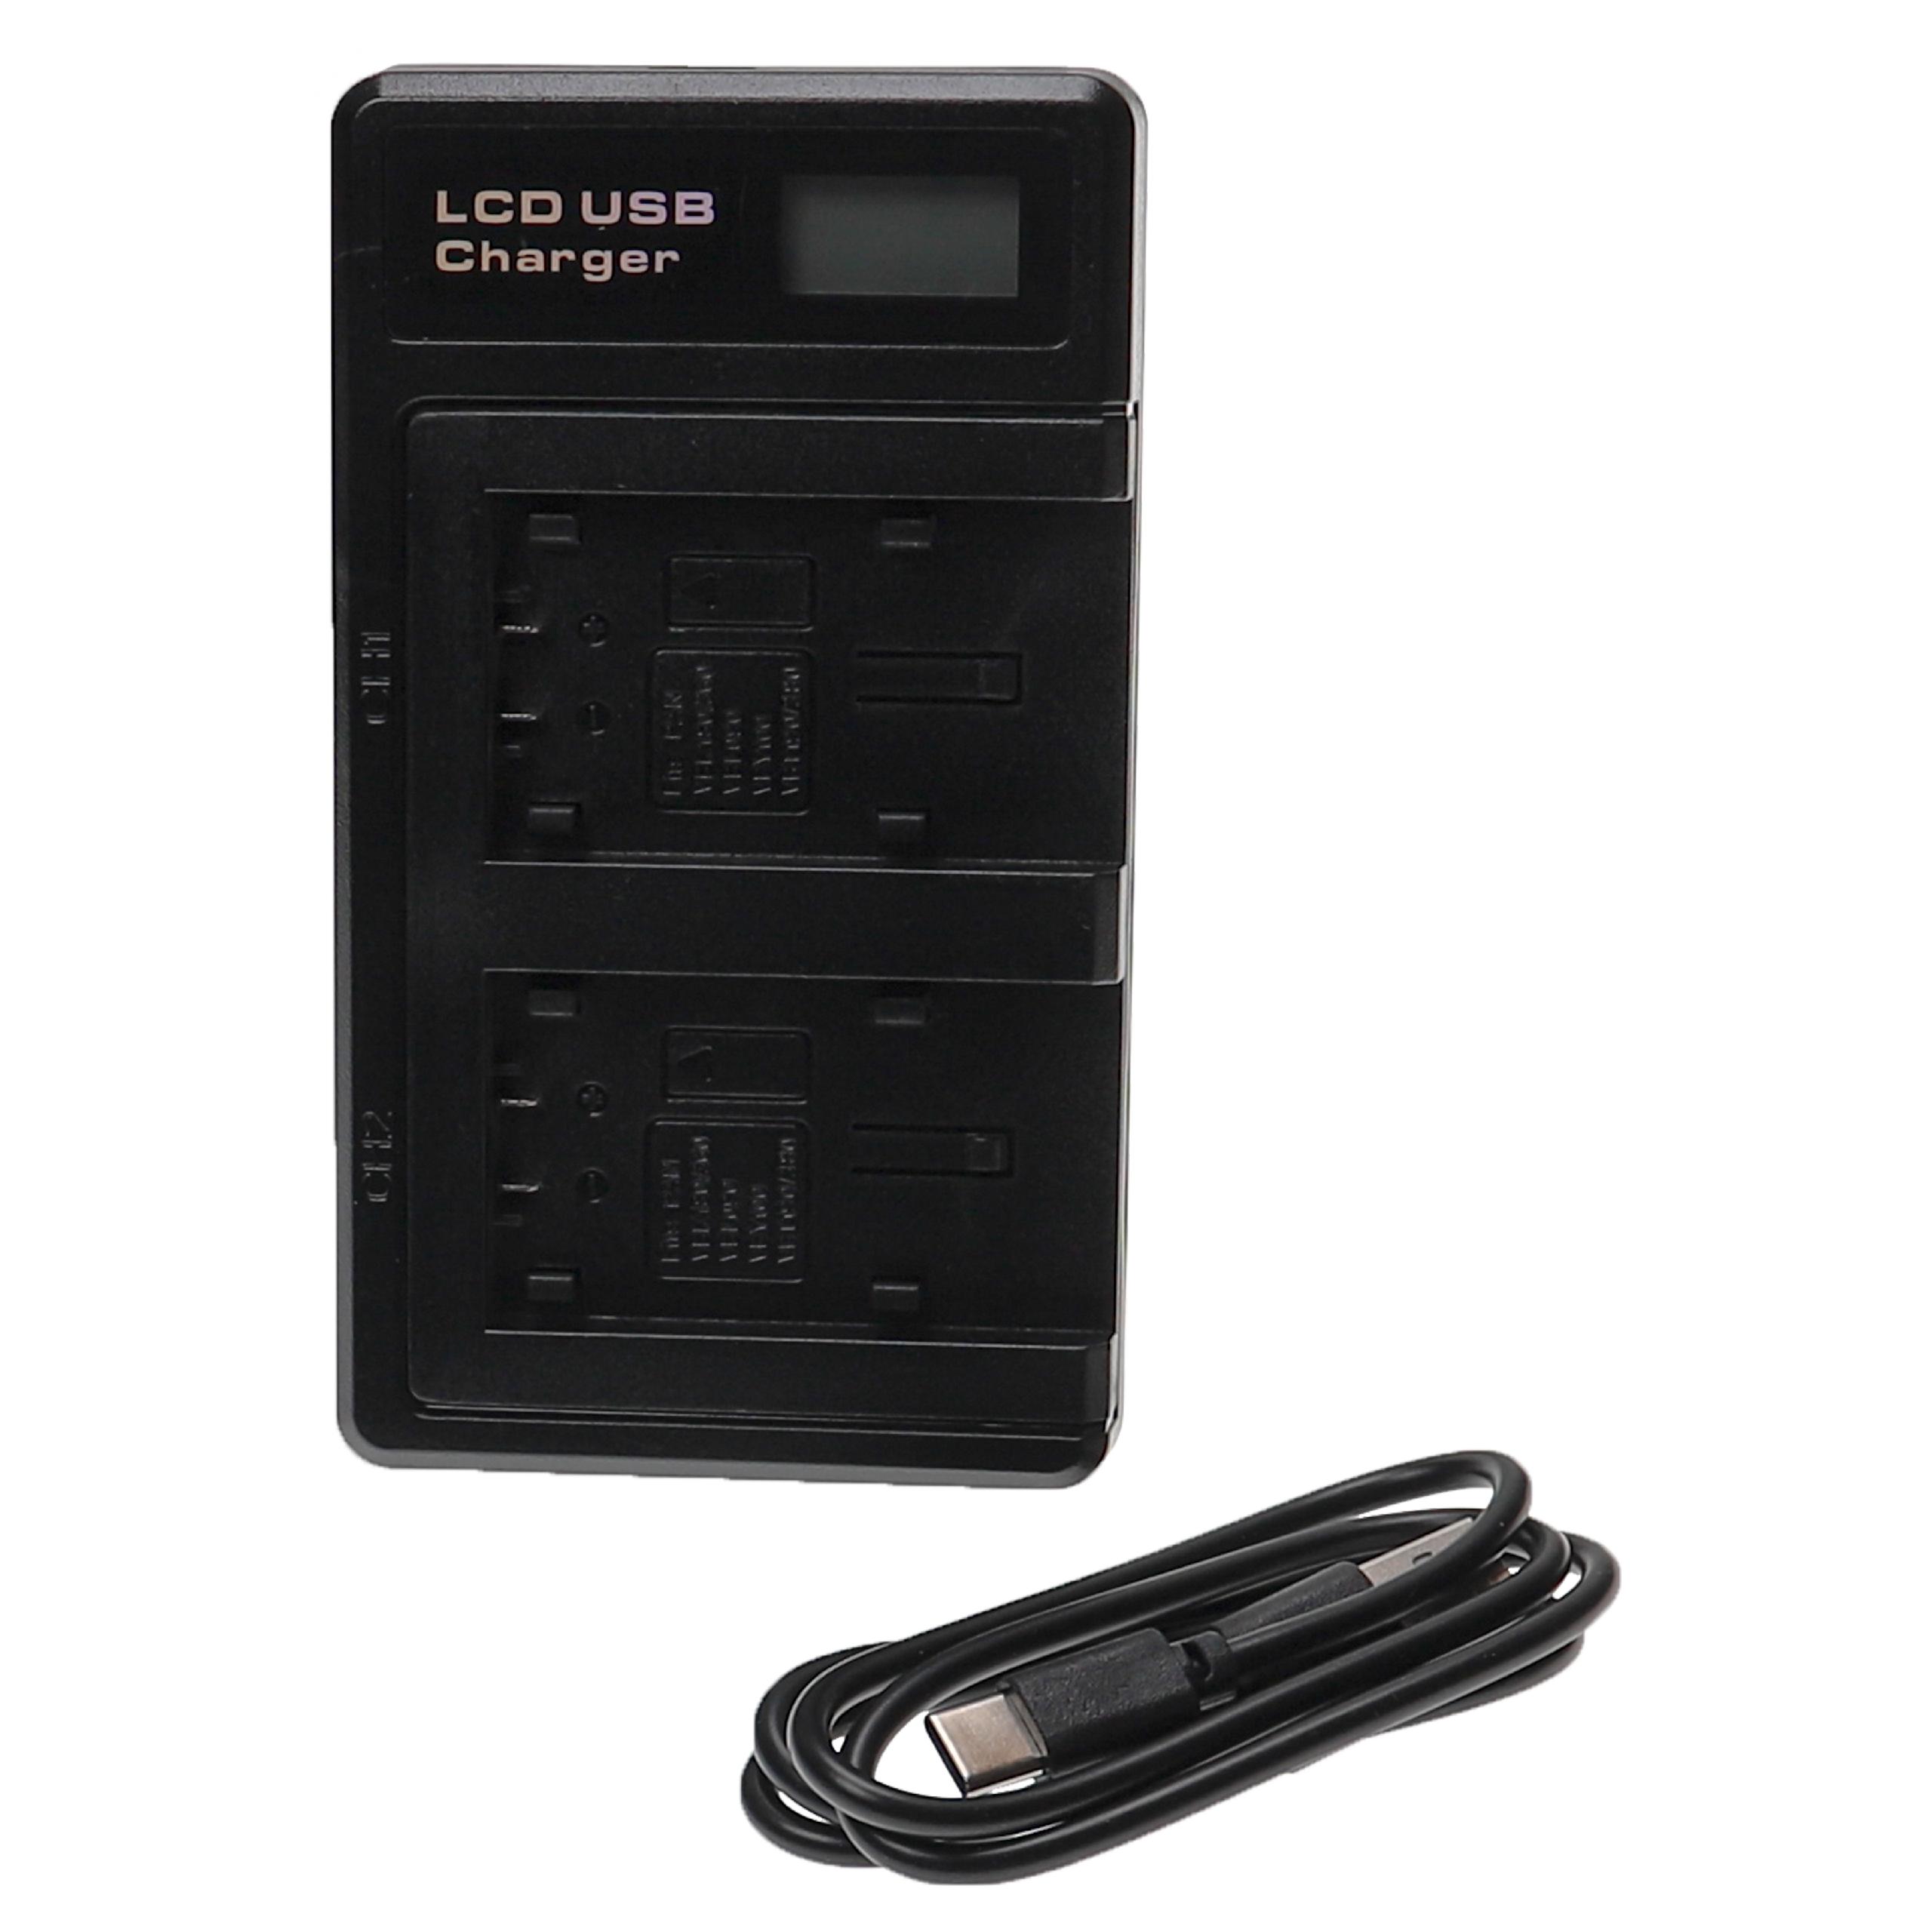 Battery Charger suitable for HC-V10 Camera etc. 